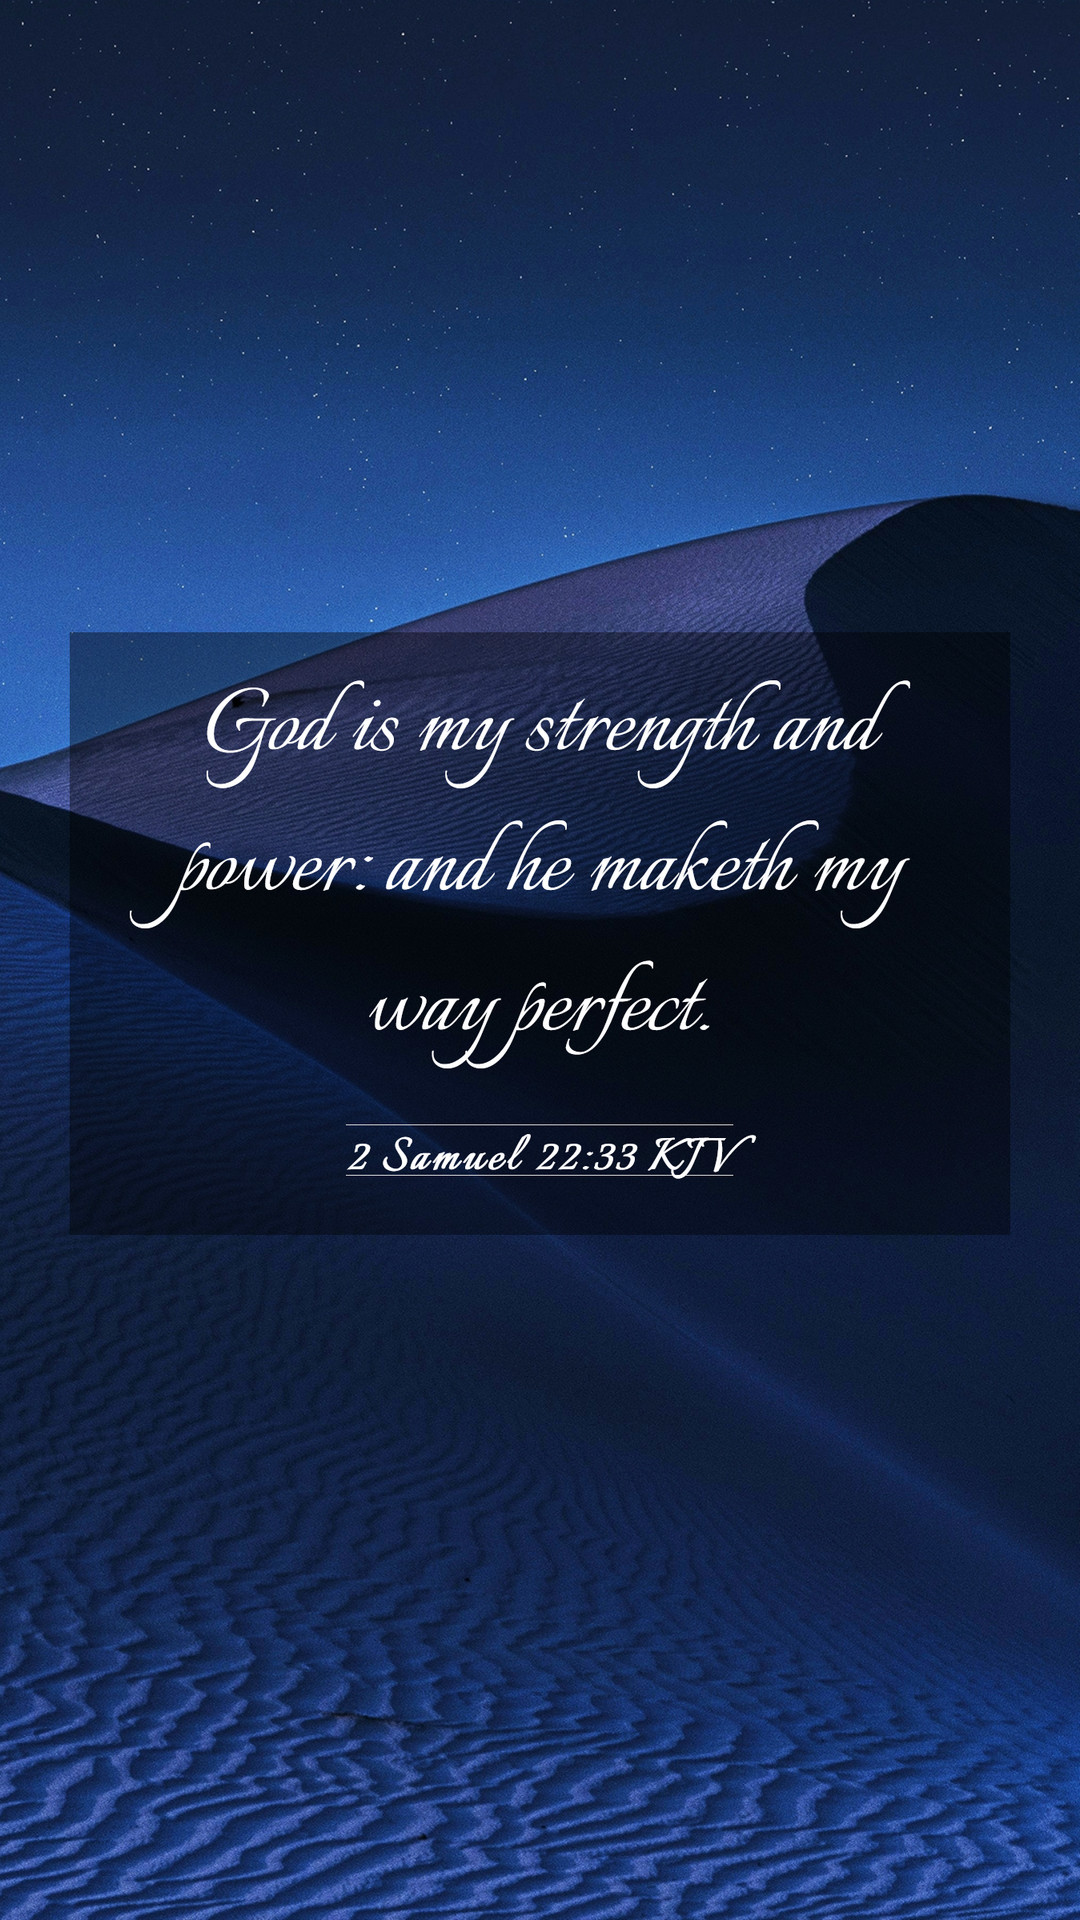 Samuel 22:33 KJV Mobile Phone Wallpaper is my strength and power: and he maketh my